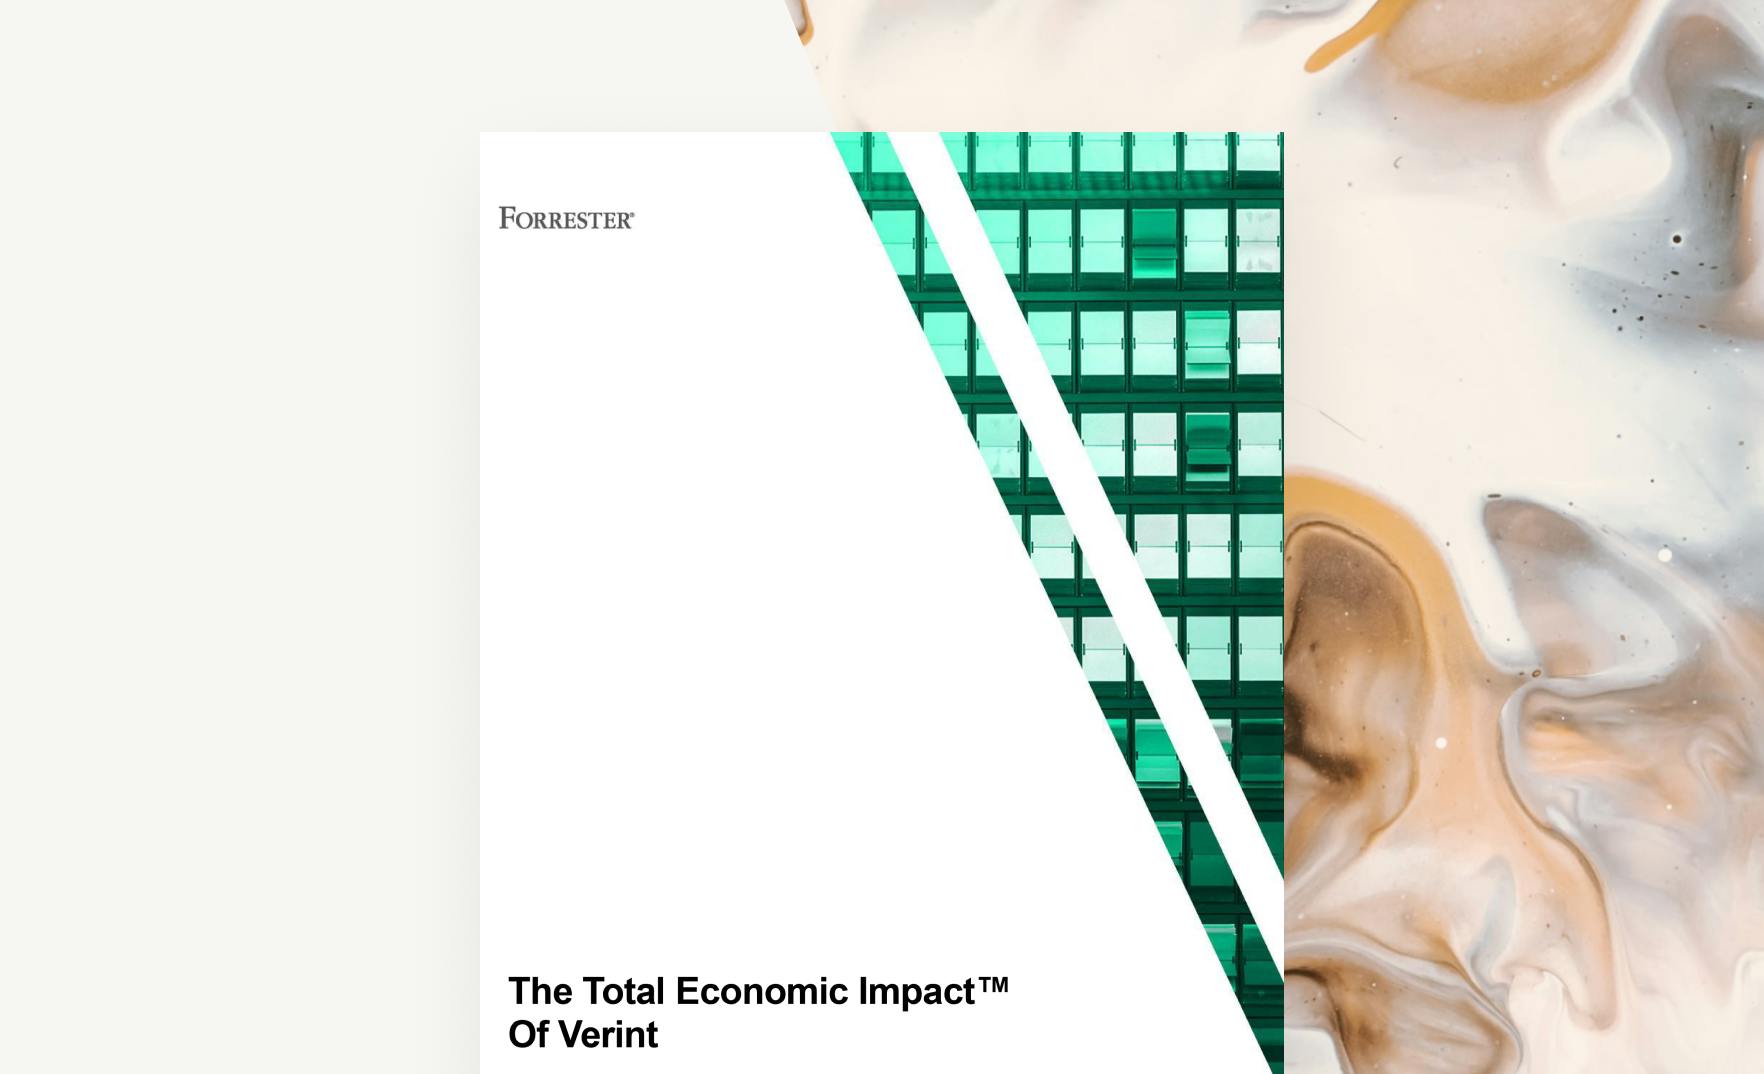 Forrester Consulting’s The Total Economic Impact™ of Verint study​ cover